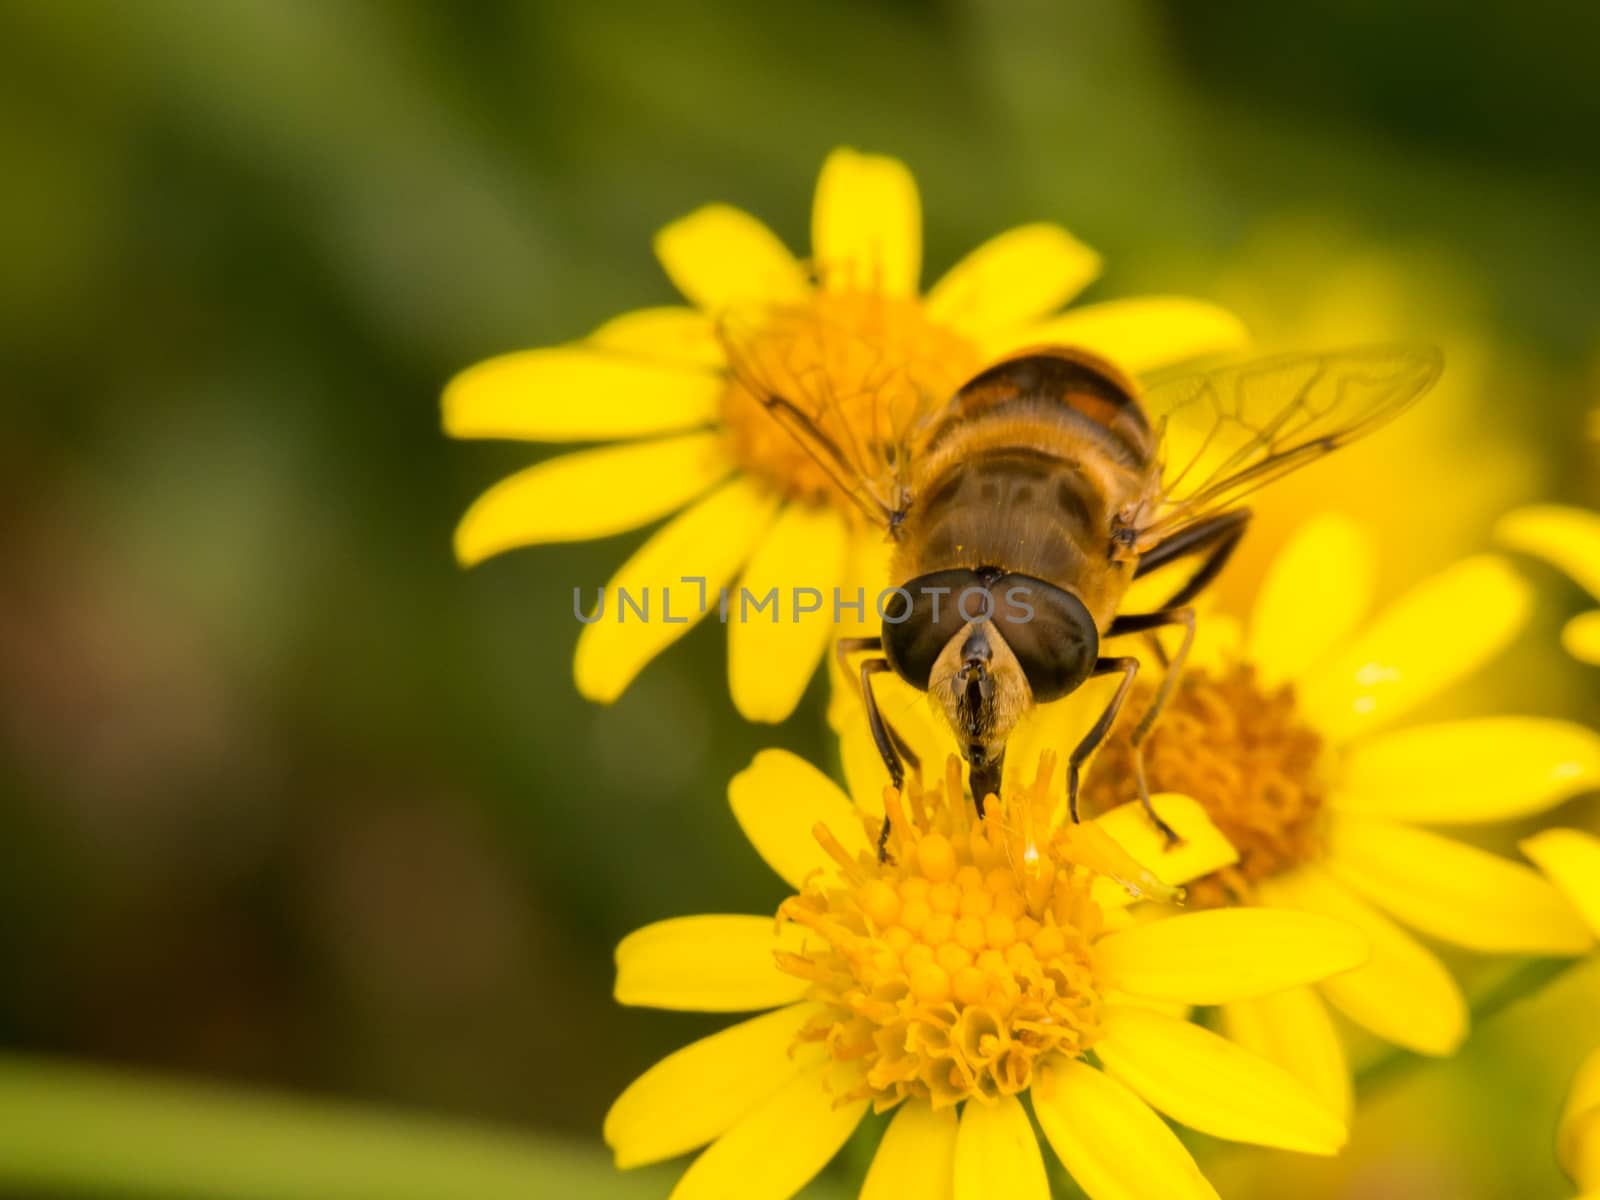 Wasp faces camera sitting on three yellow flowers